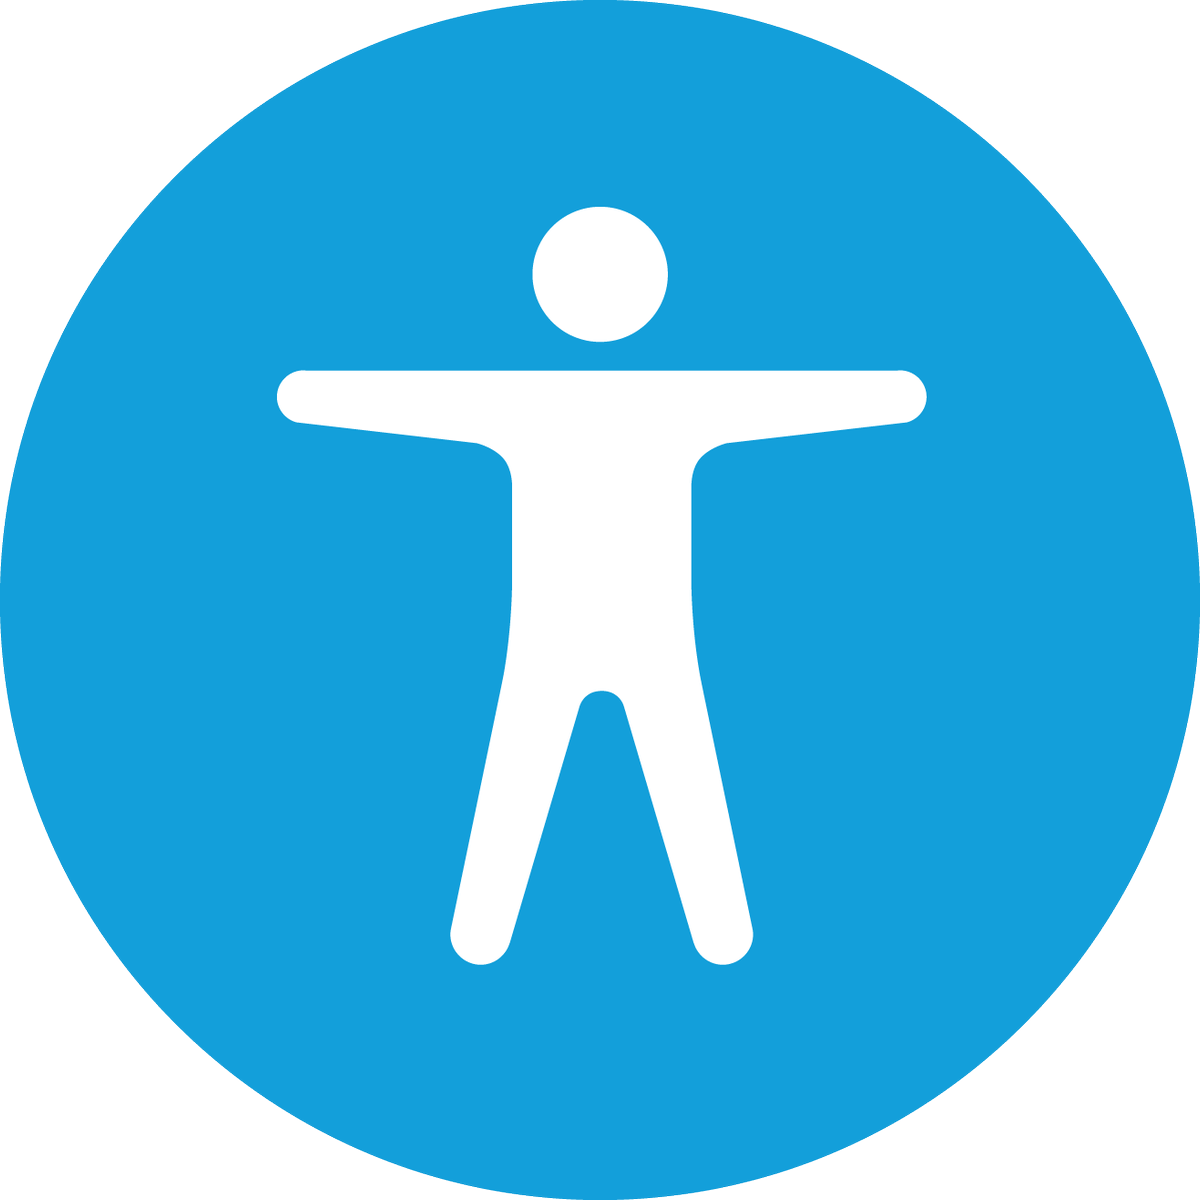 Apple's Icon For Accessibility, The Vitruvian Man - Question Mark (1200x1200)